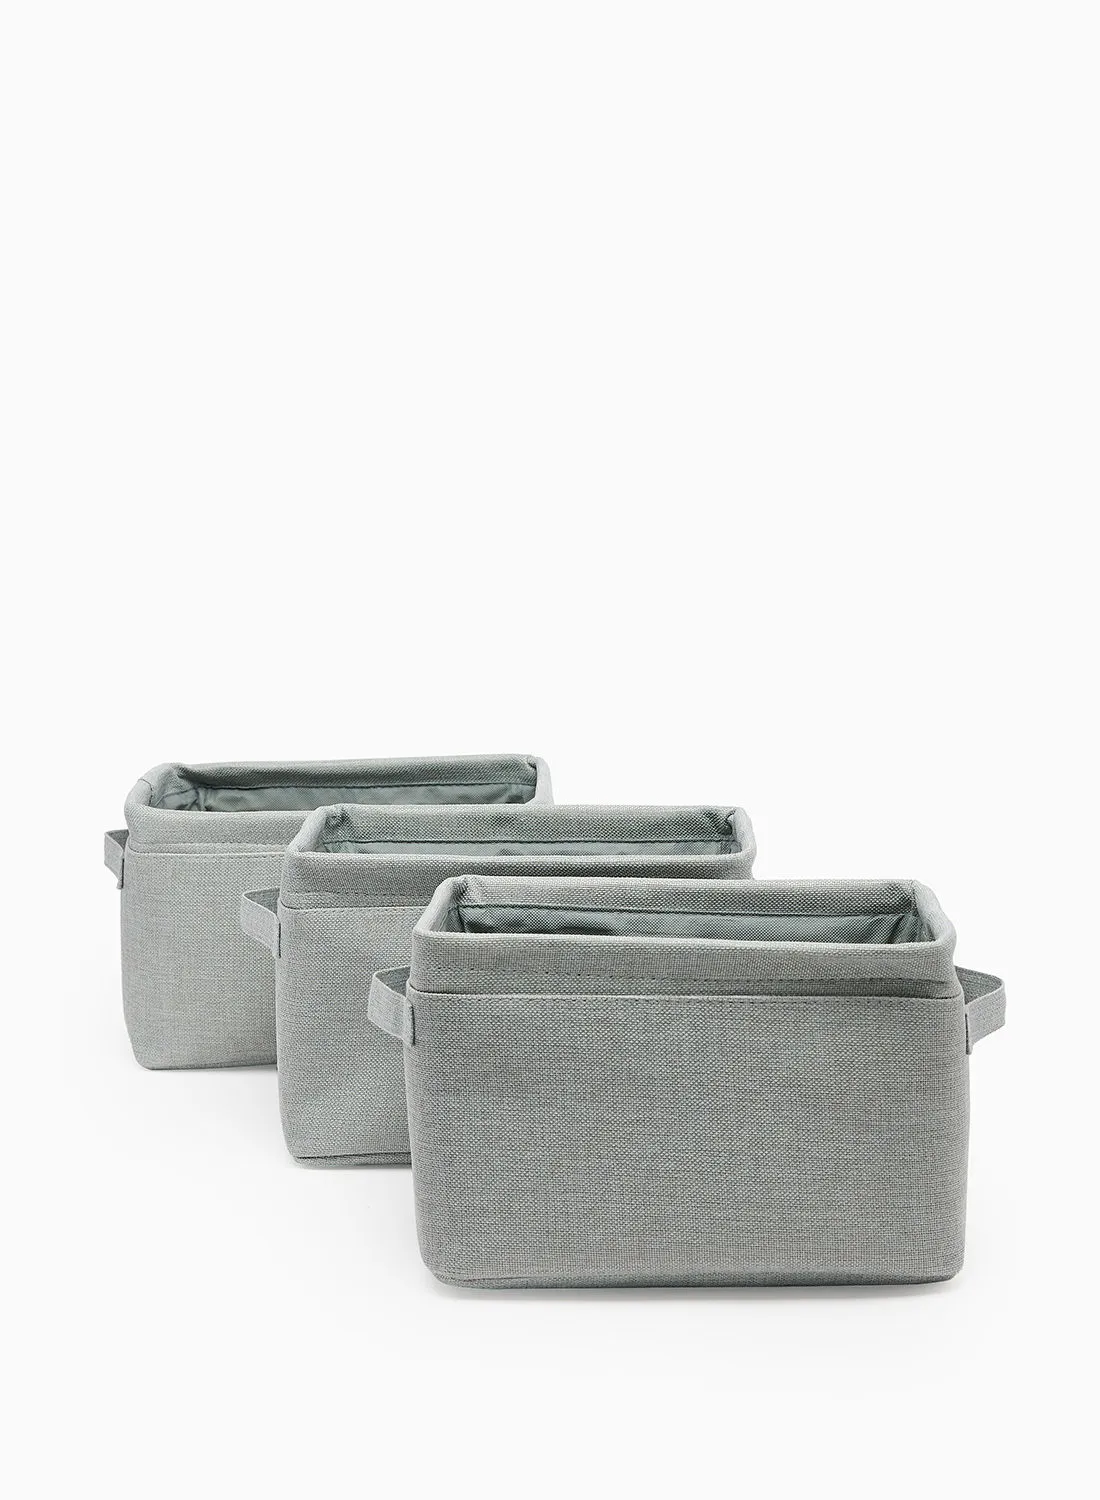 Amal 3 Pack Linen Storage Organiser With Side Handles Easy To Collapse From The Top, Handy For Closet And Dresser Organisation Light Grey 30X20X20cm